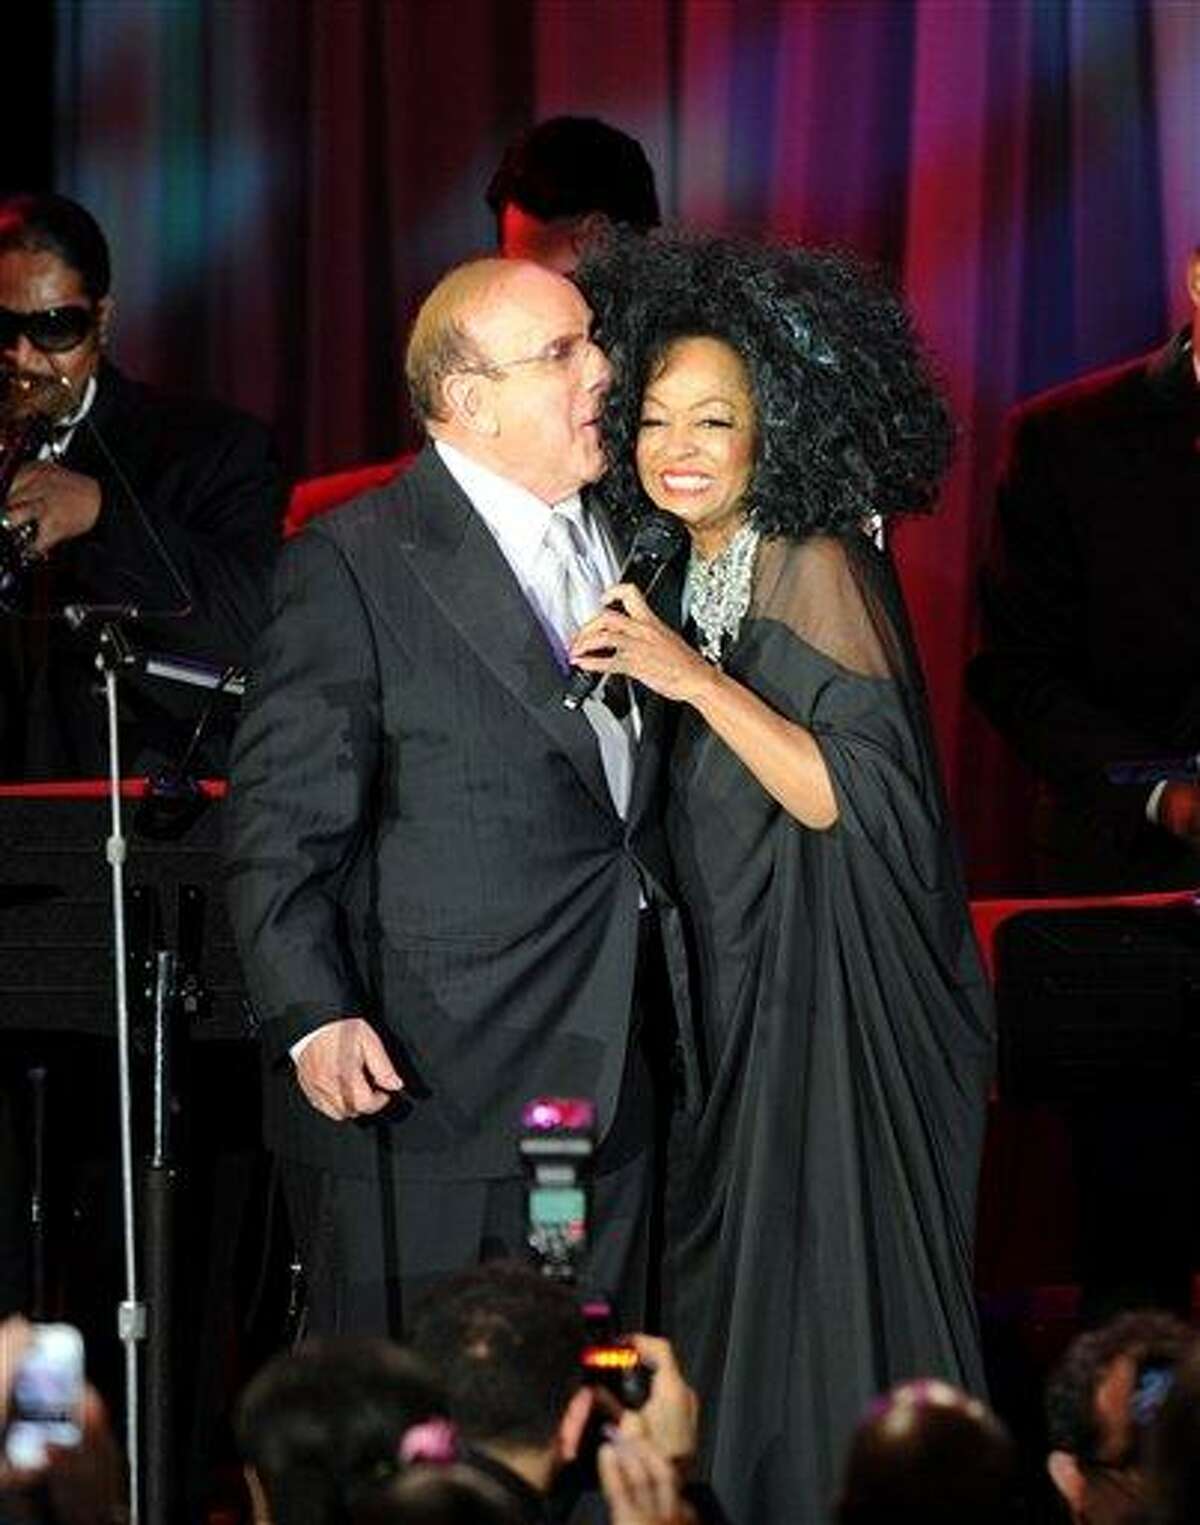 Clive Davis and Diana Ross speak onstage at the Pre-GRAMMY Gala & Salute to Industry Icons with Clive Davis honoring Richard Branson, Saturday in Beverly Hills, Calif. Associated Press